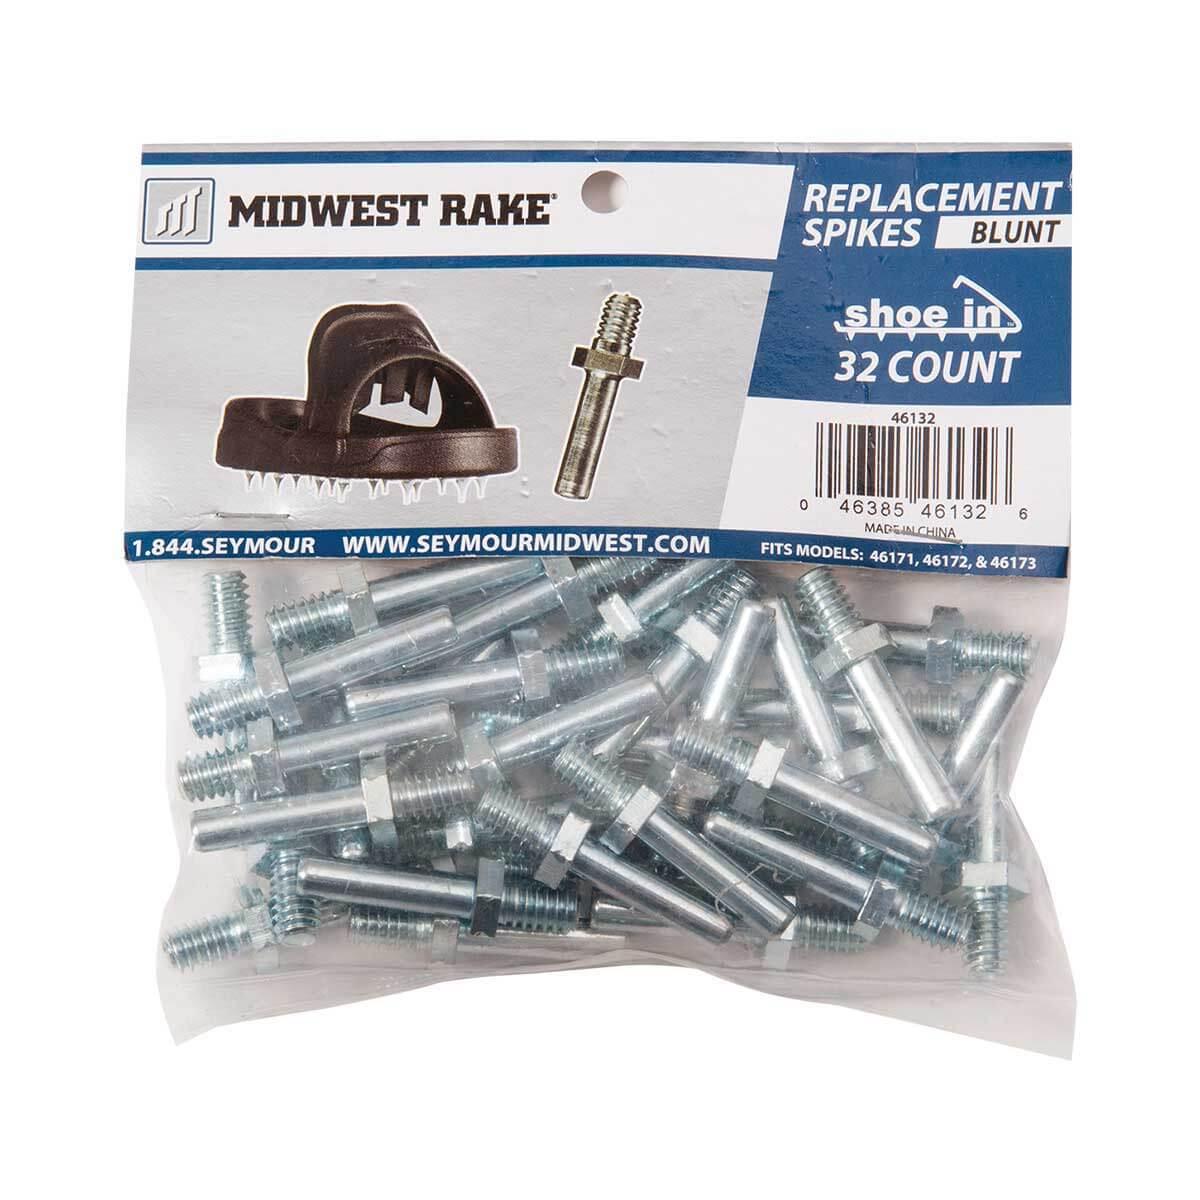 Midwest Rake Spiked Shoes 1-1/2" Spikes P/N 46110 